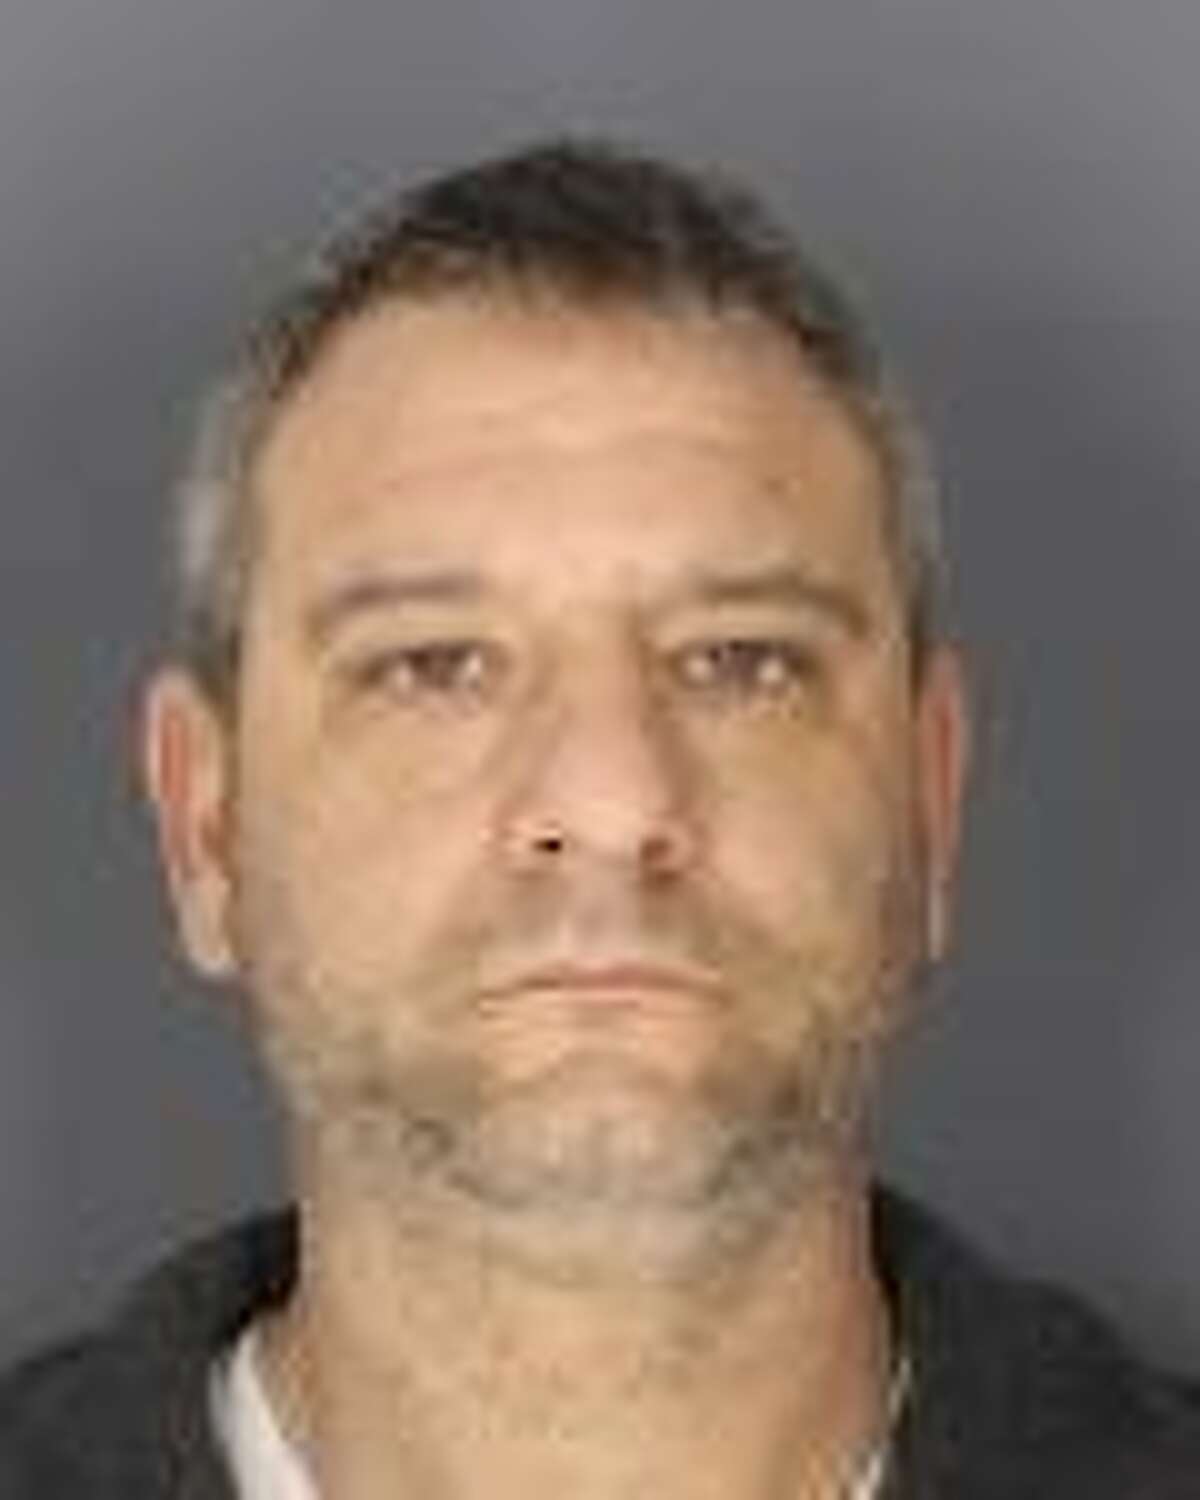 Marco Genito, 41, of Schodack is accused of stealing steel